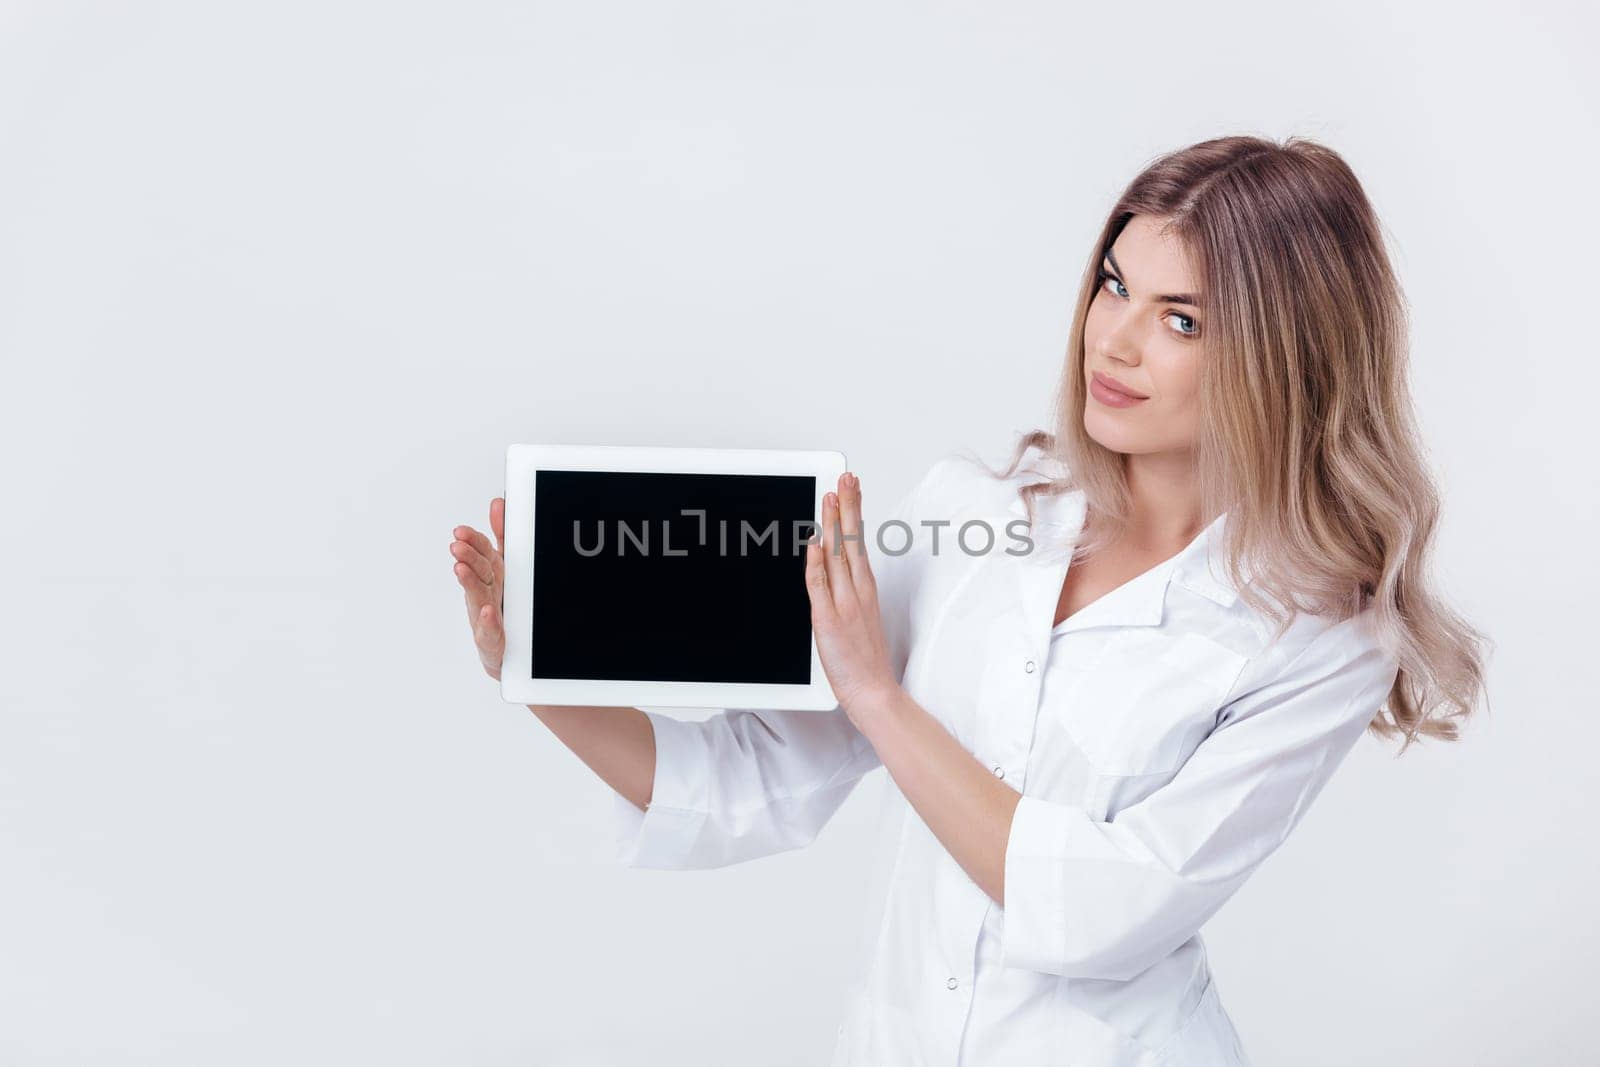 Portrait of smiling blonde doctor in white coat showing screen of digital tablet in her hand. Healthcare and technology concept.